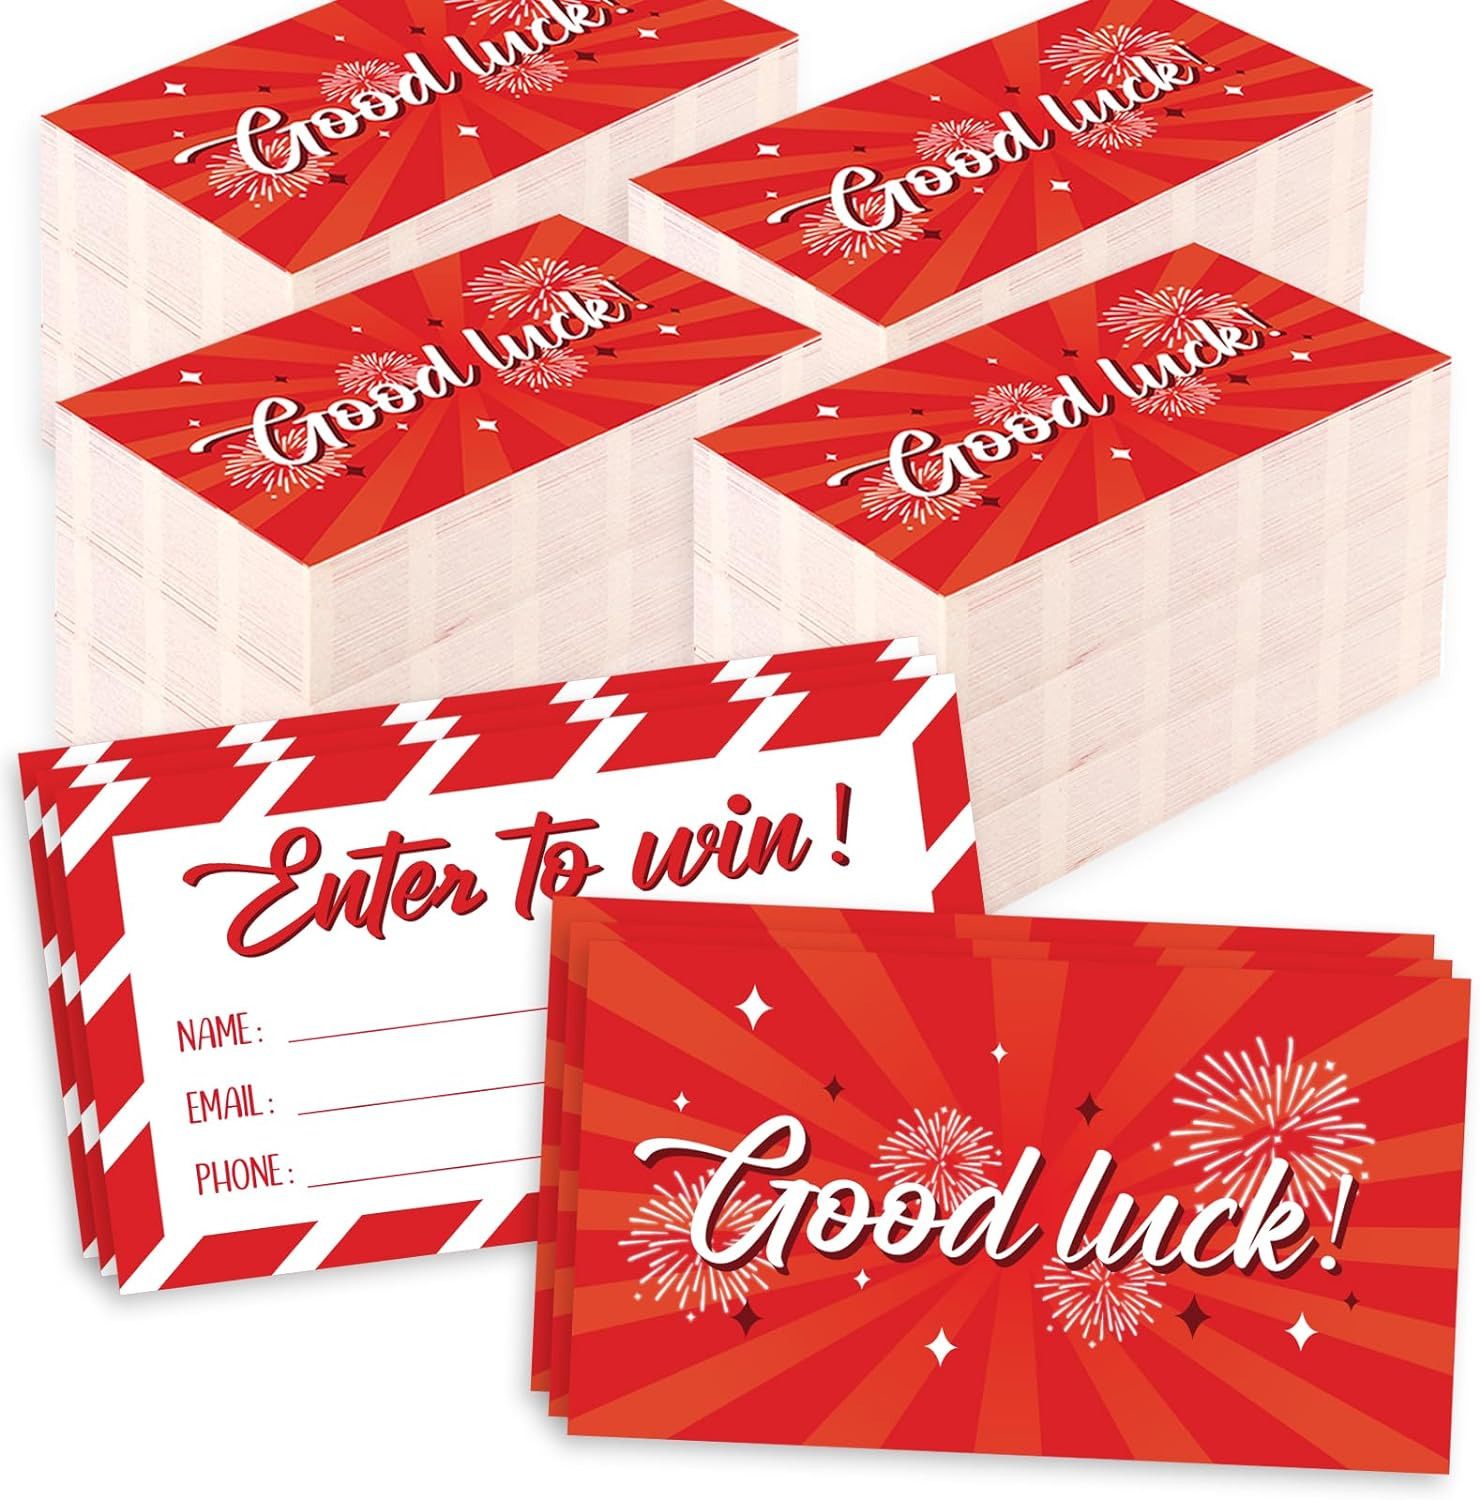 1200 Pcs Red Enter to Win Raffle Tickets Cards 3.5 X 2 Inch Entry Form Ticket 